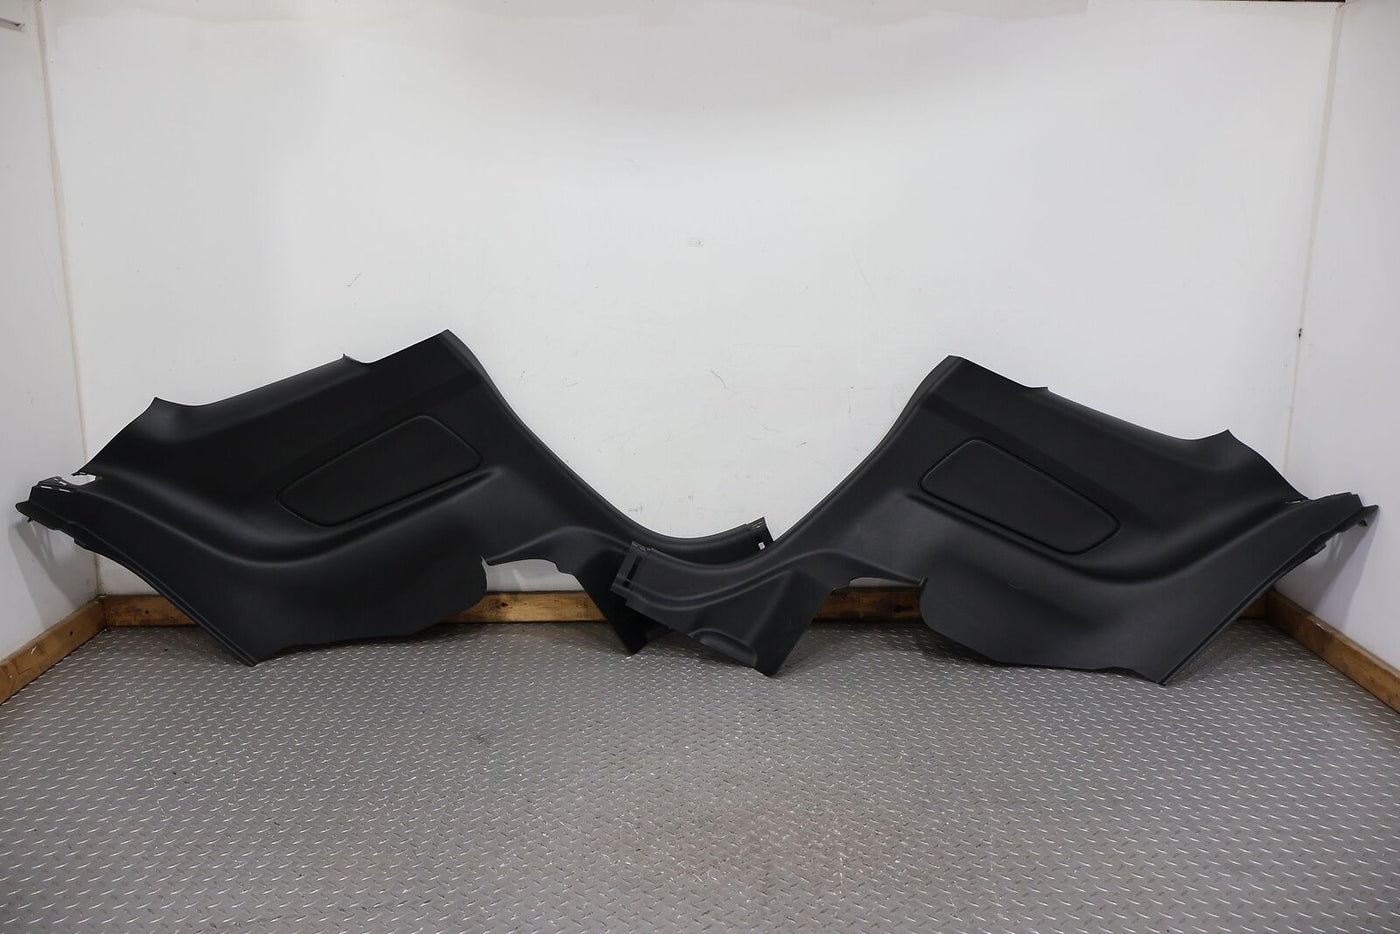 15-17 Ford Mustang GT Coupe Pair LH&RH Rear Interior Quarter Trm Panels (Ebony)